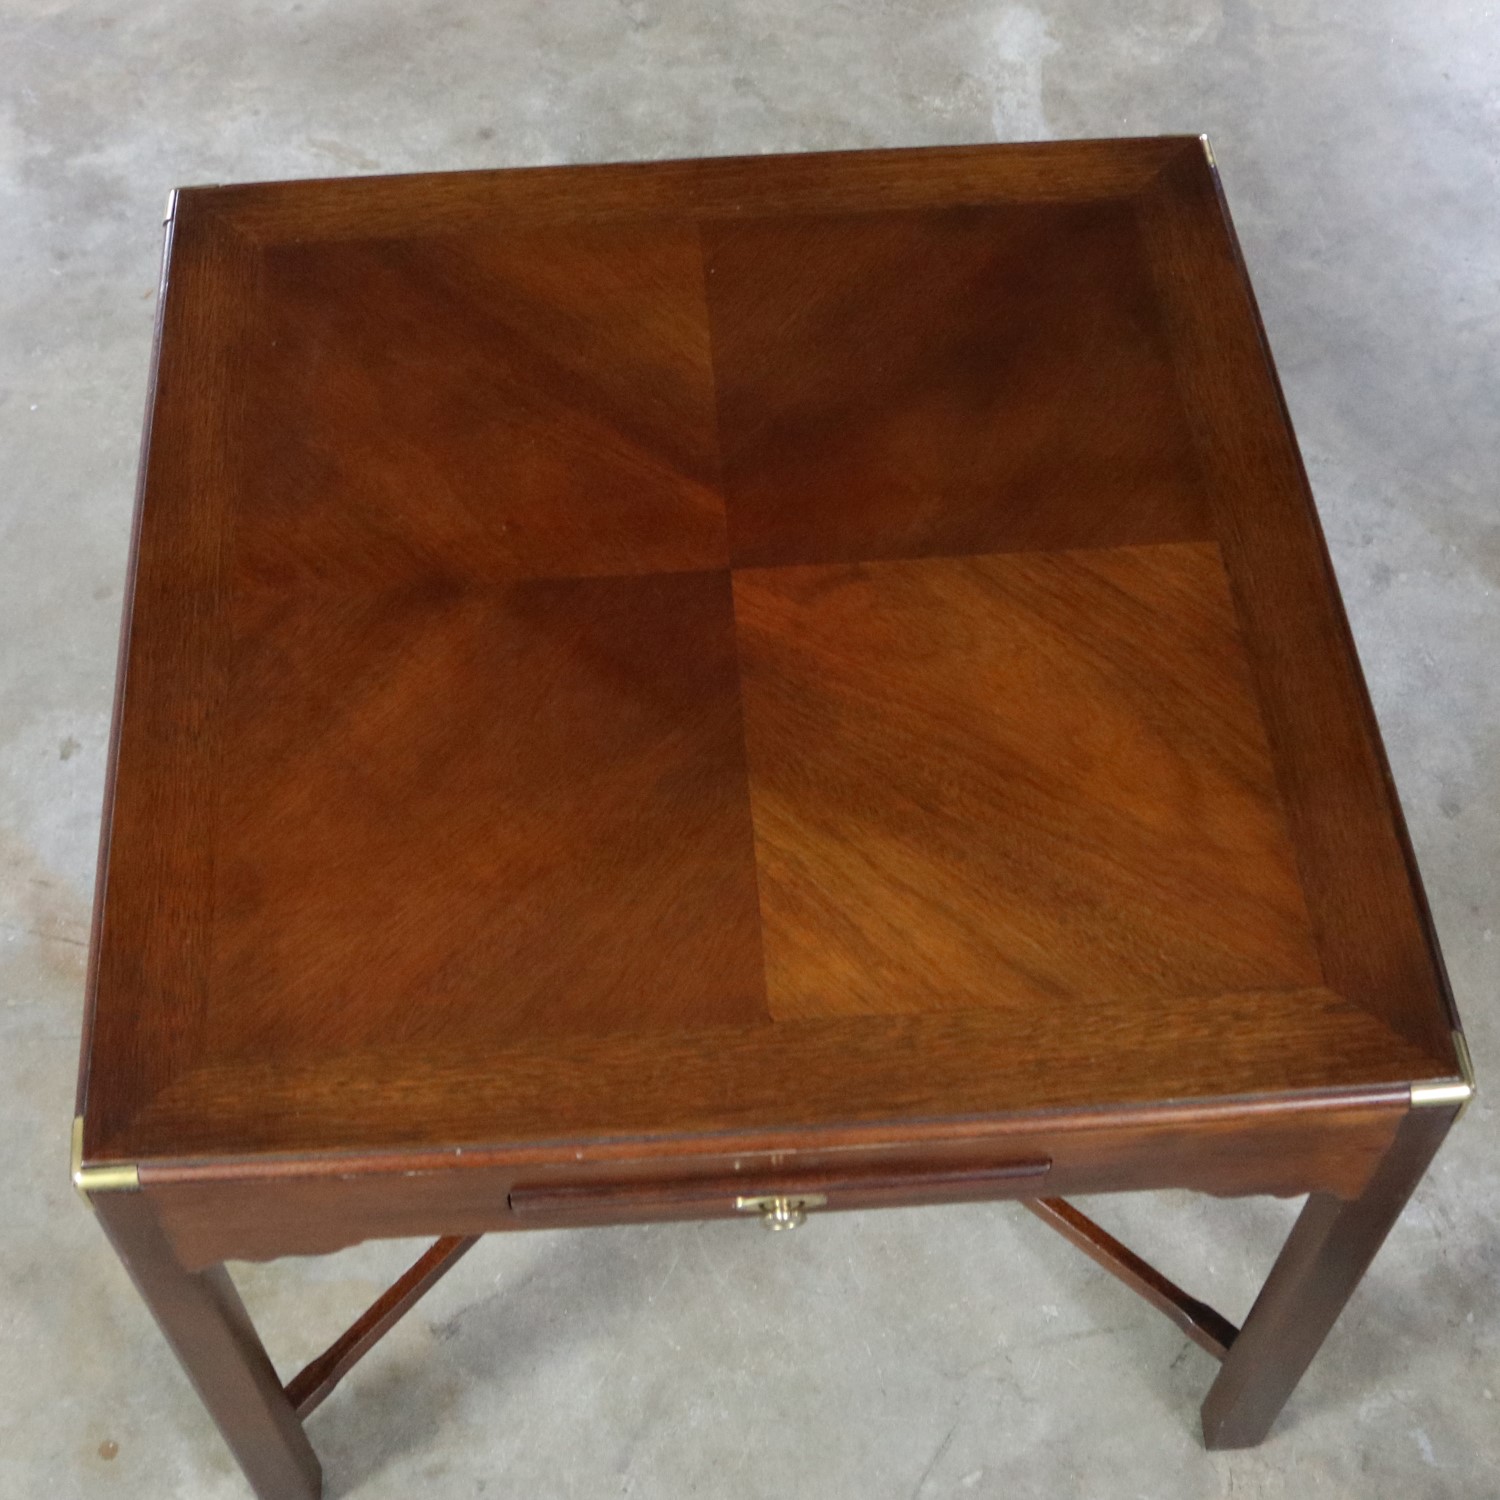 Campaign Style Square Side or End Table with Pull-Out Shelf and Brass Accents